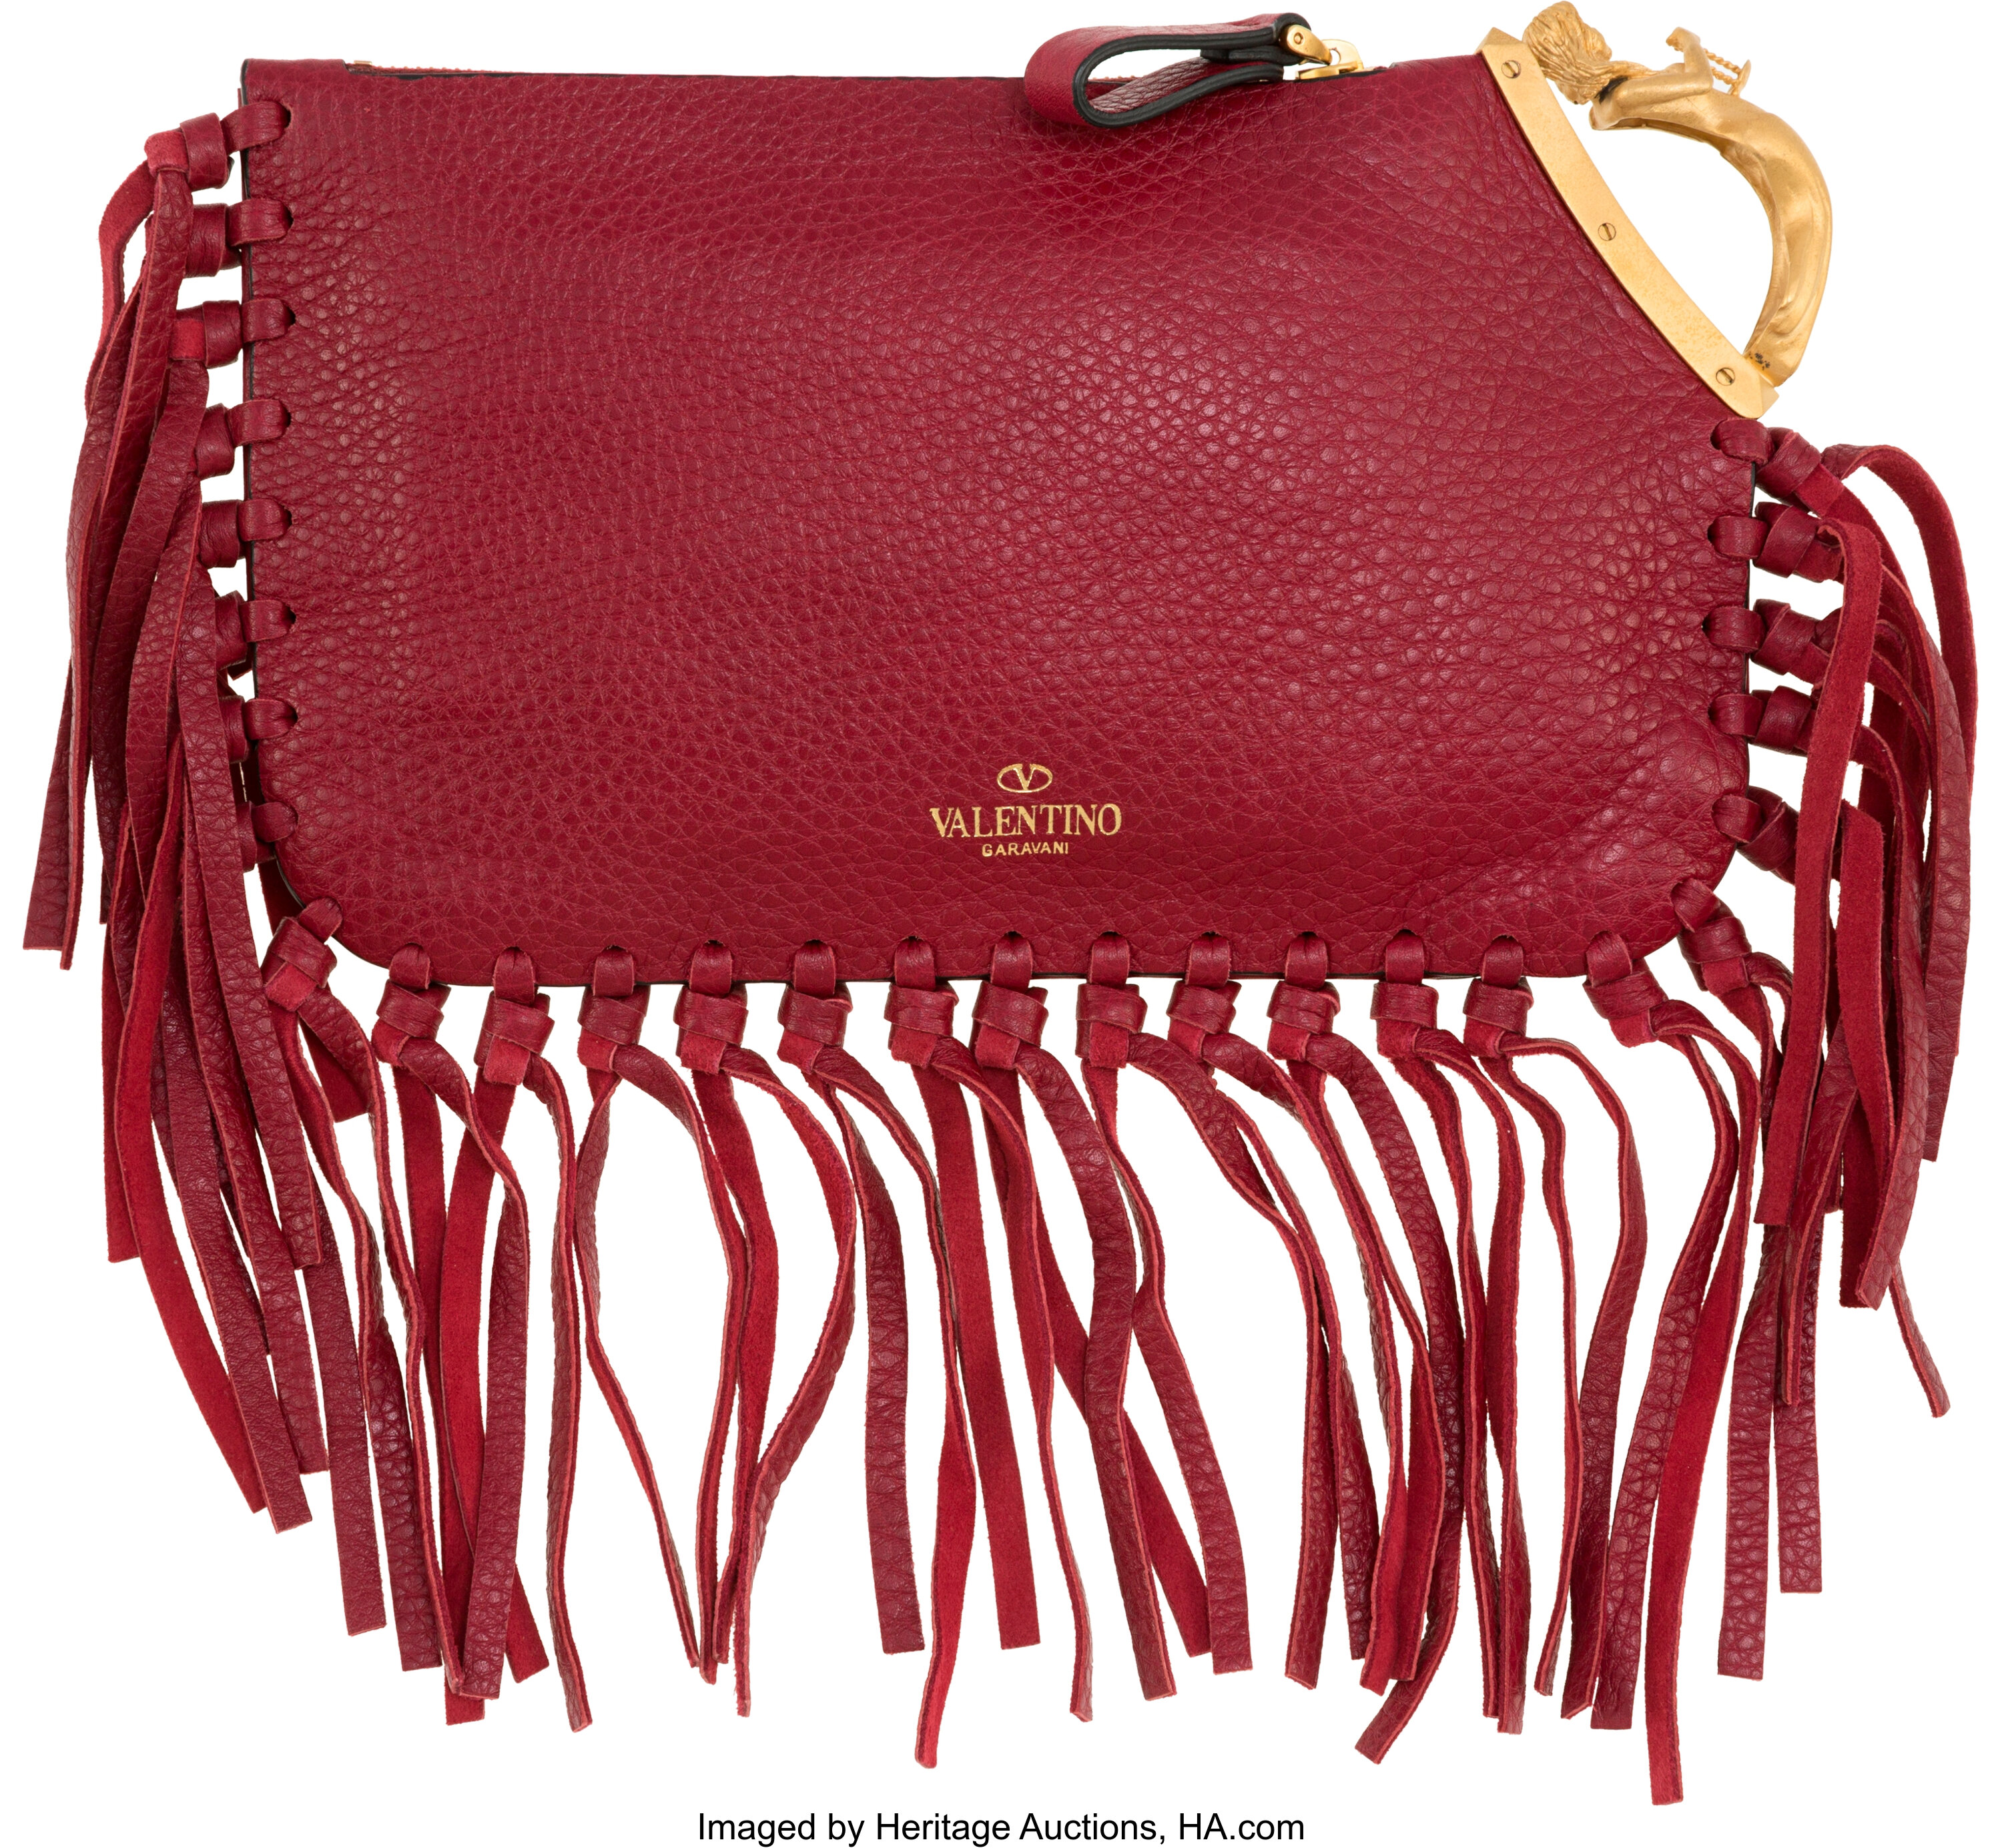 Valentino Red Leather Libra Fringe Clutch Bag. Excellent Condition. | #58369 | Heritage Auctions